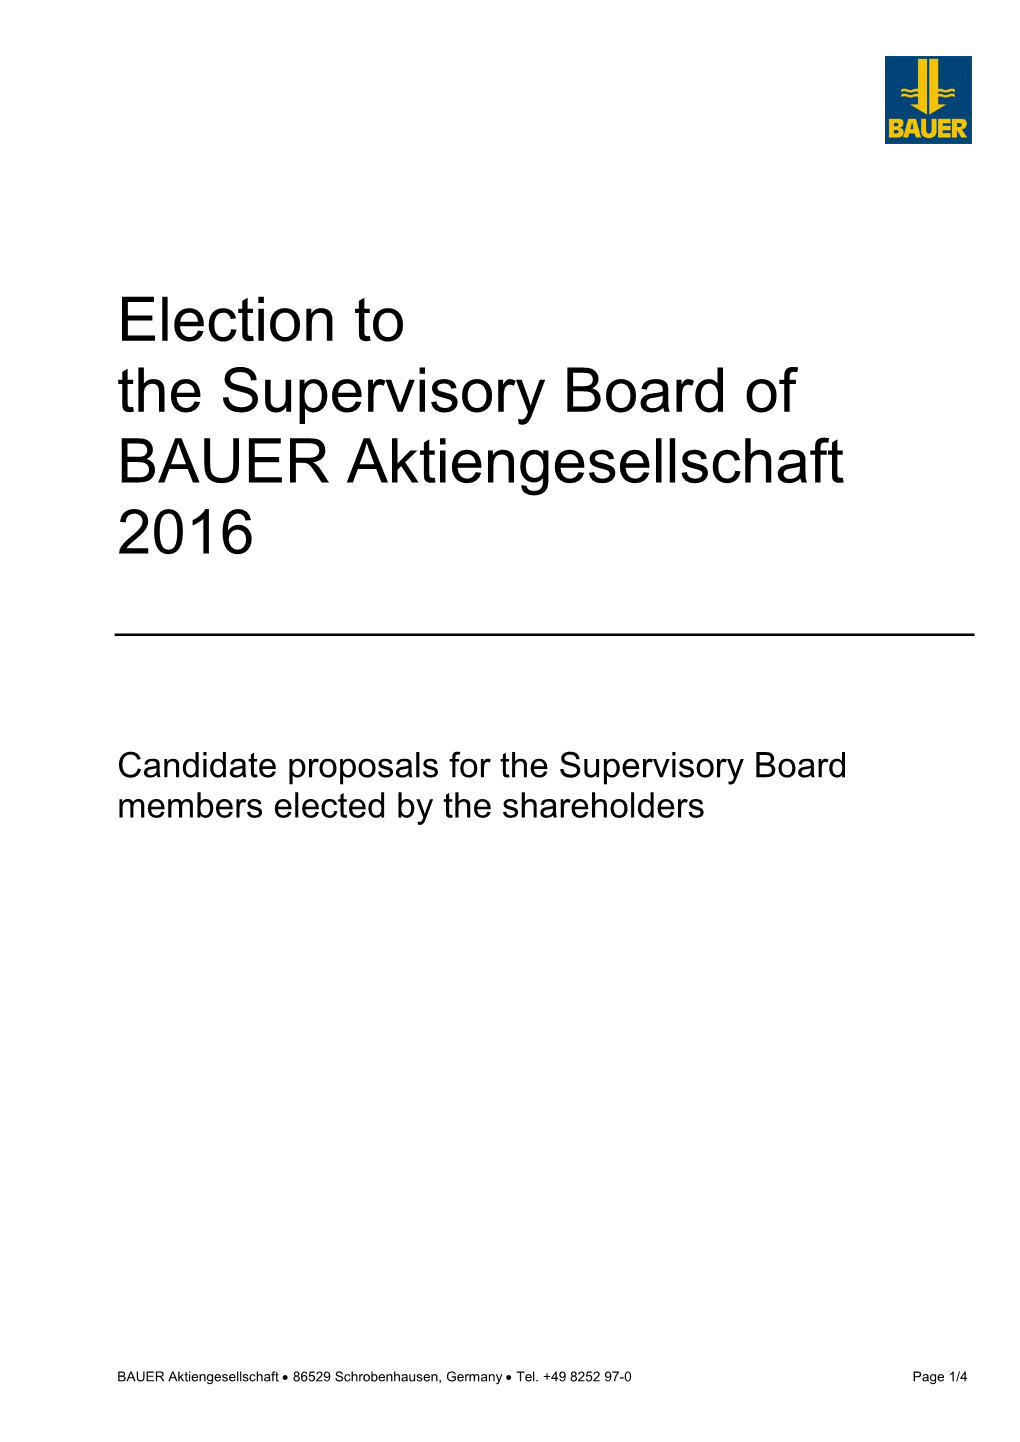 Election to the Supervisory Board of BAUER Aktiengesellschaft 2016